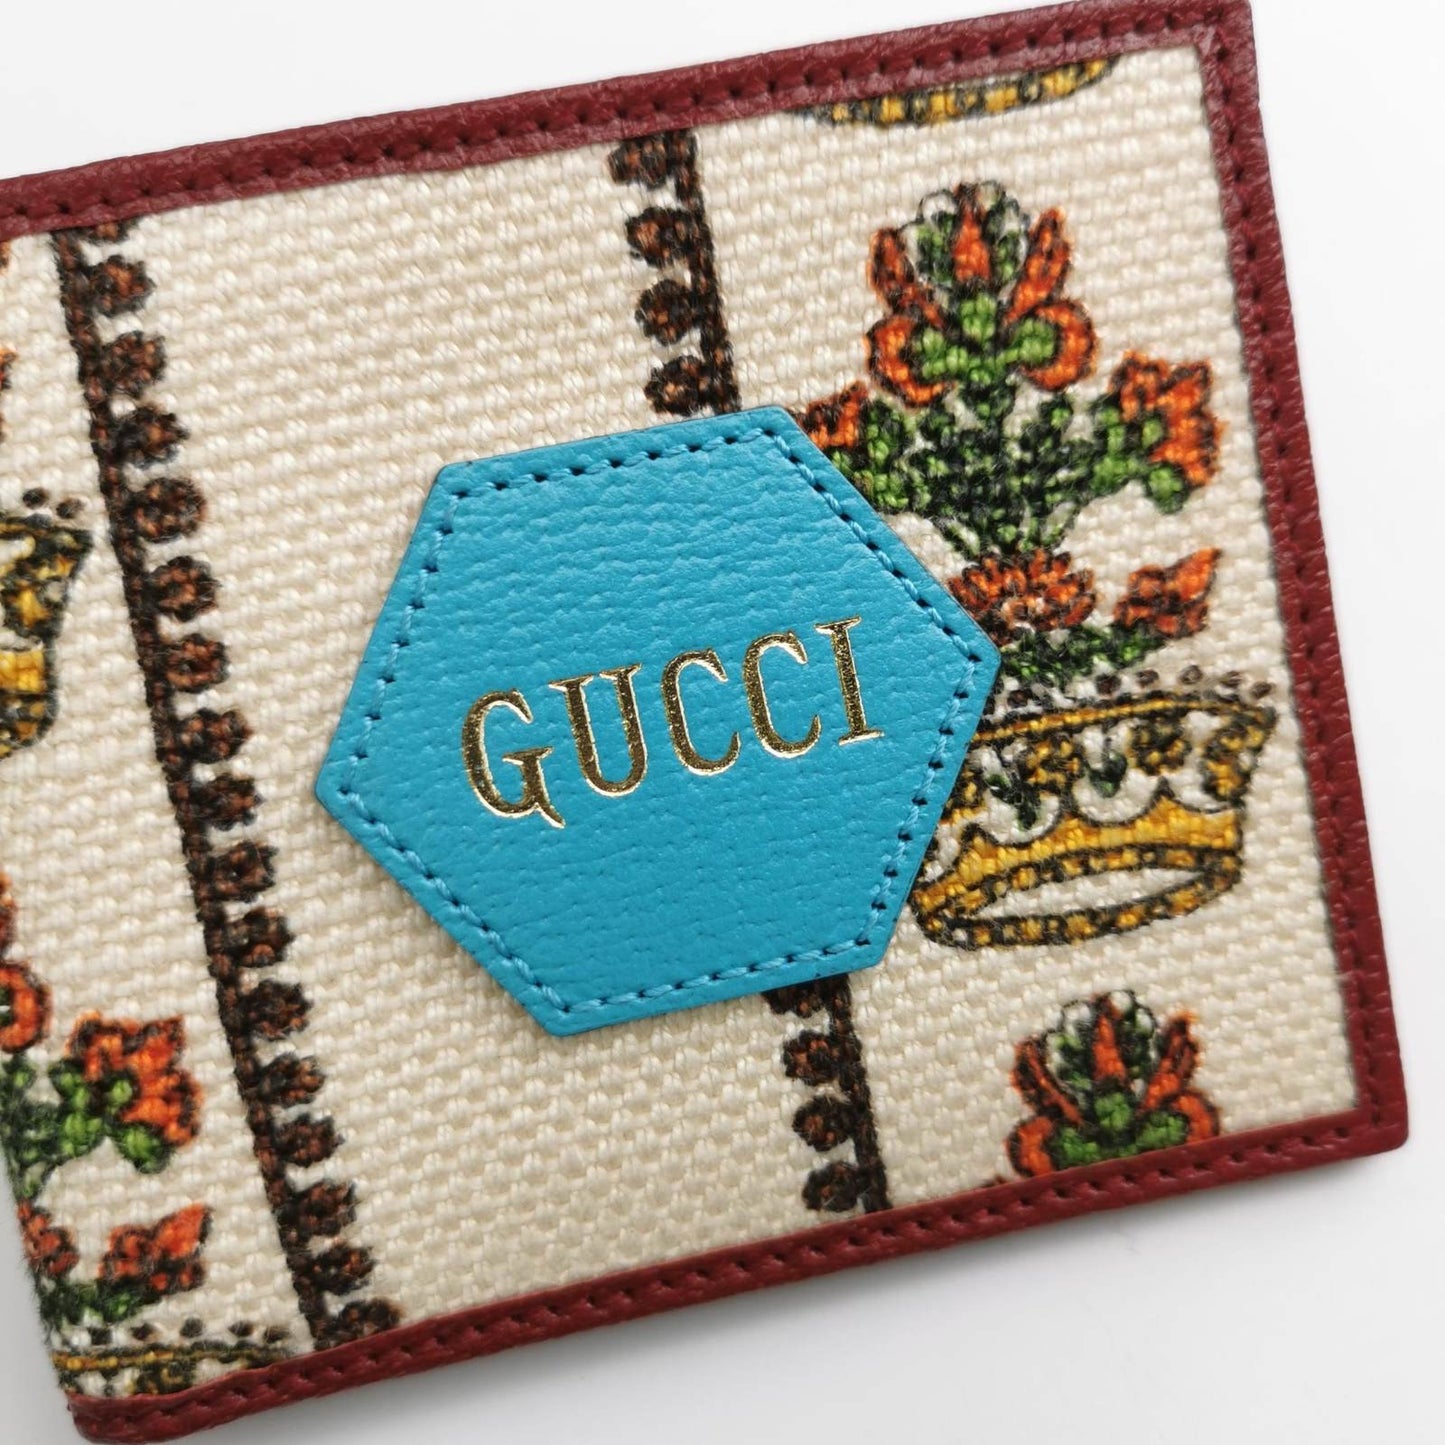 GUCCI 100 CENTENNIAL COTTON AND LEATHER WALLET